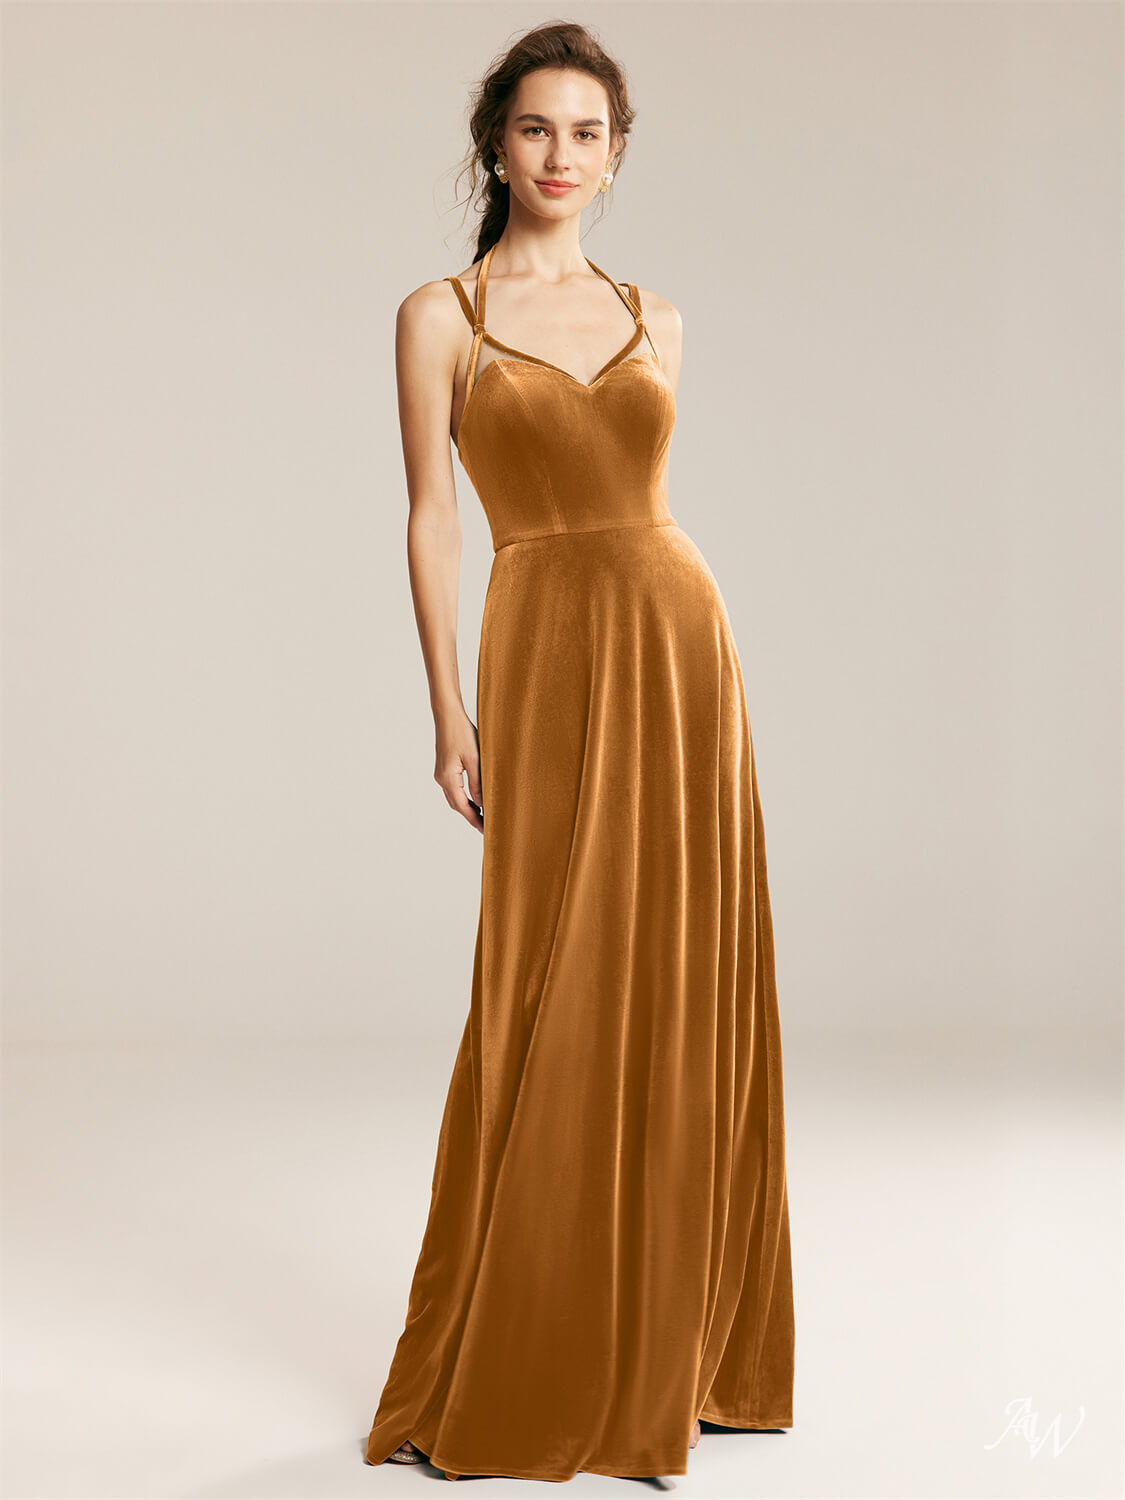 Bridesmaid dresses from AW Bridal